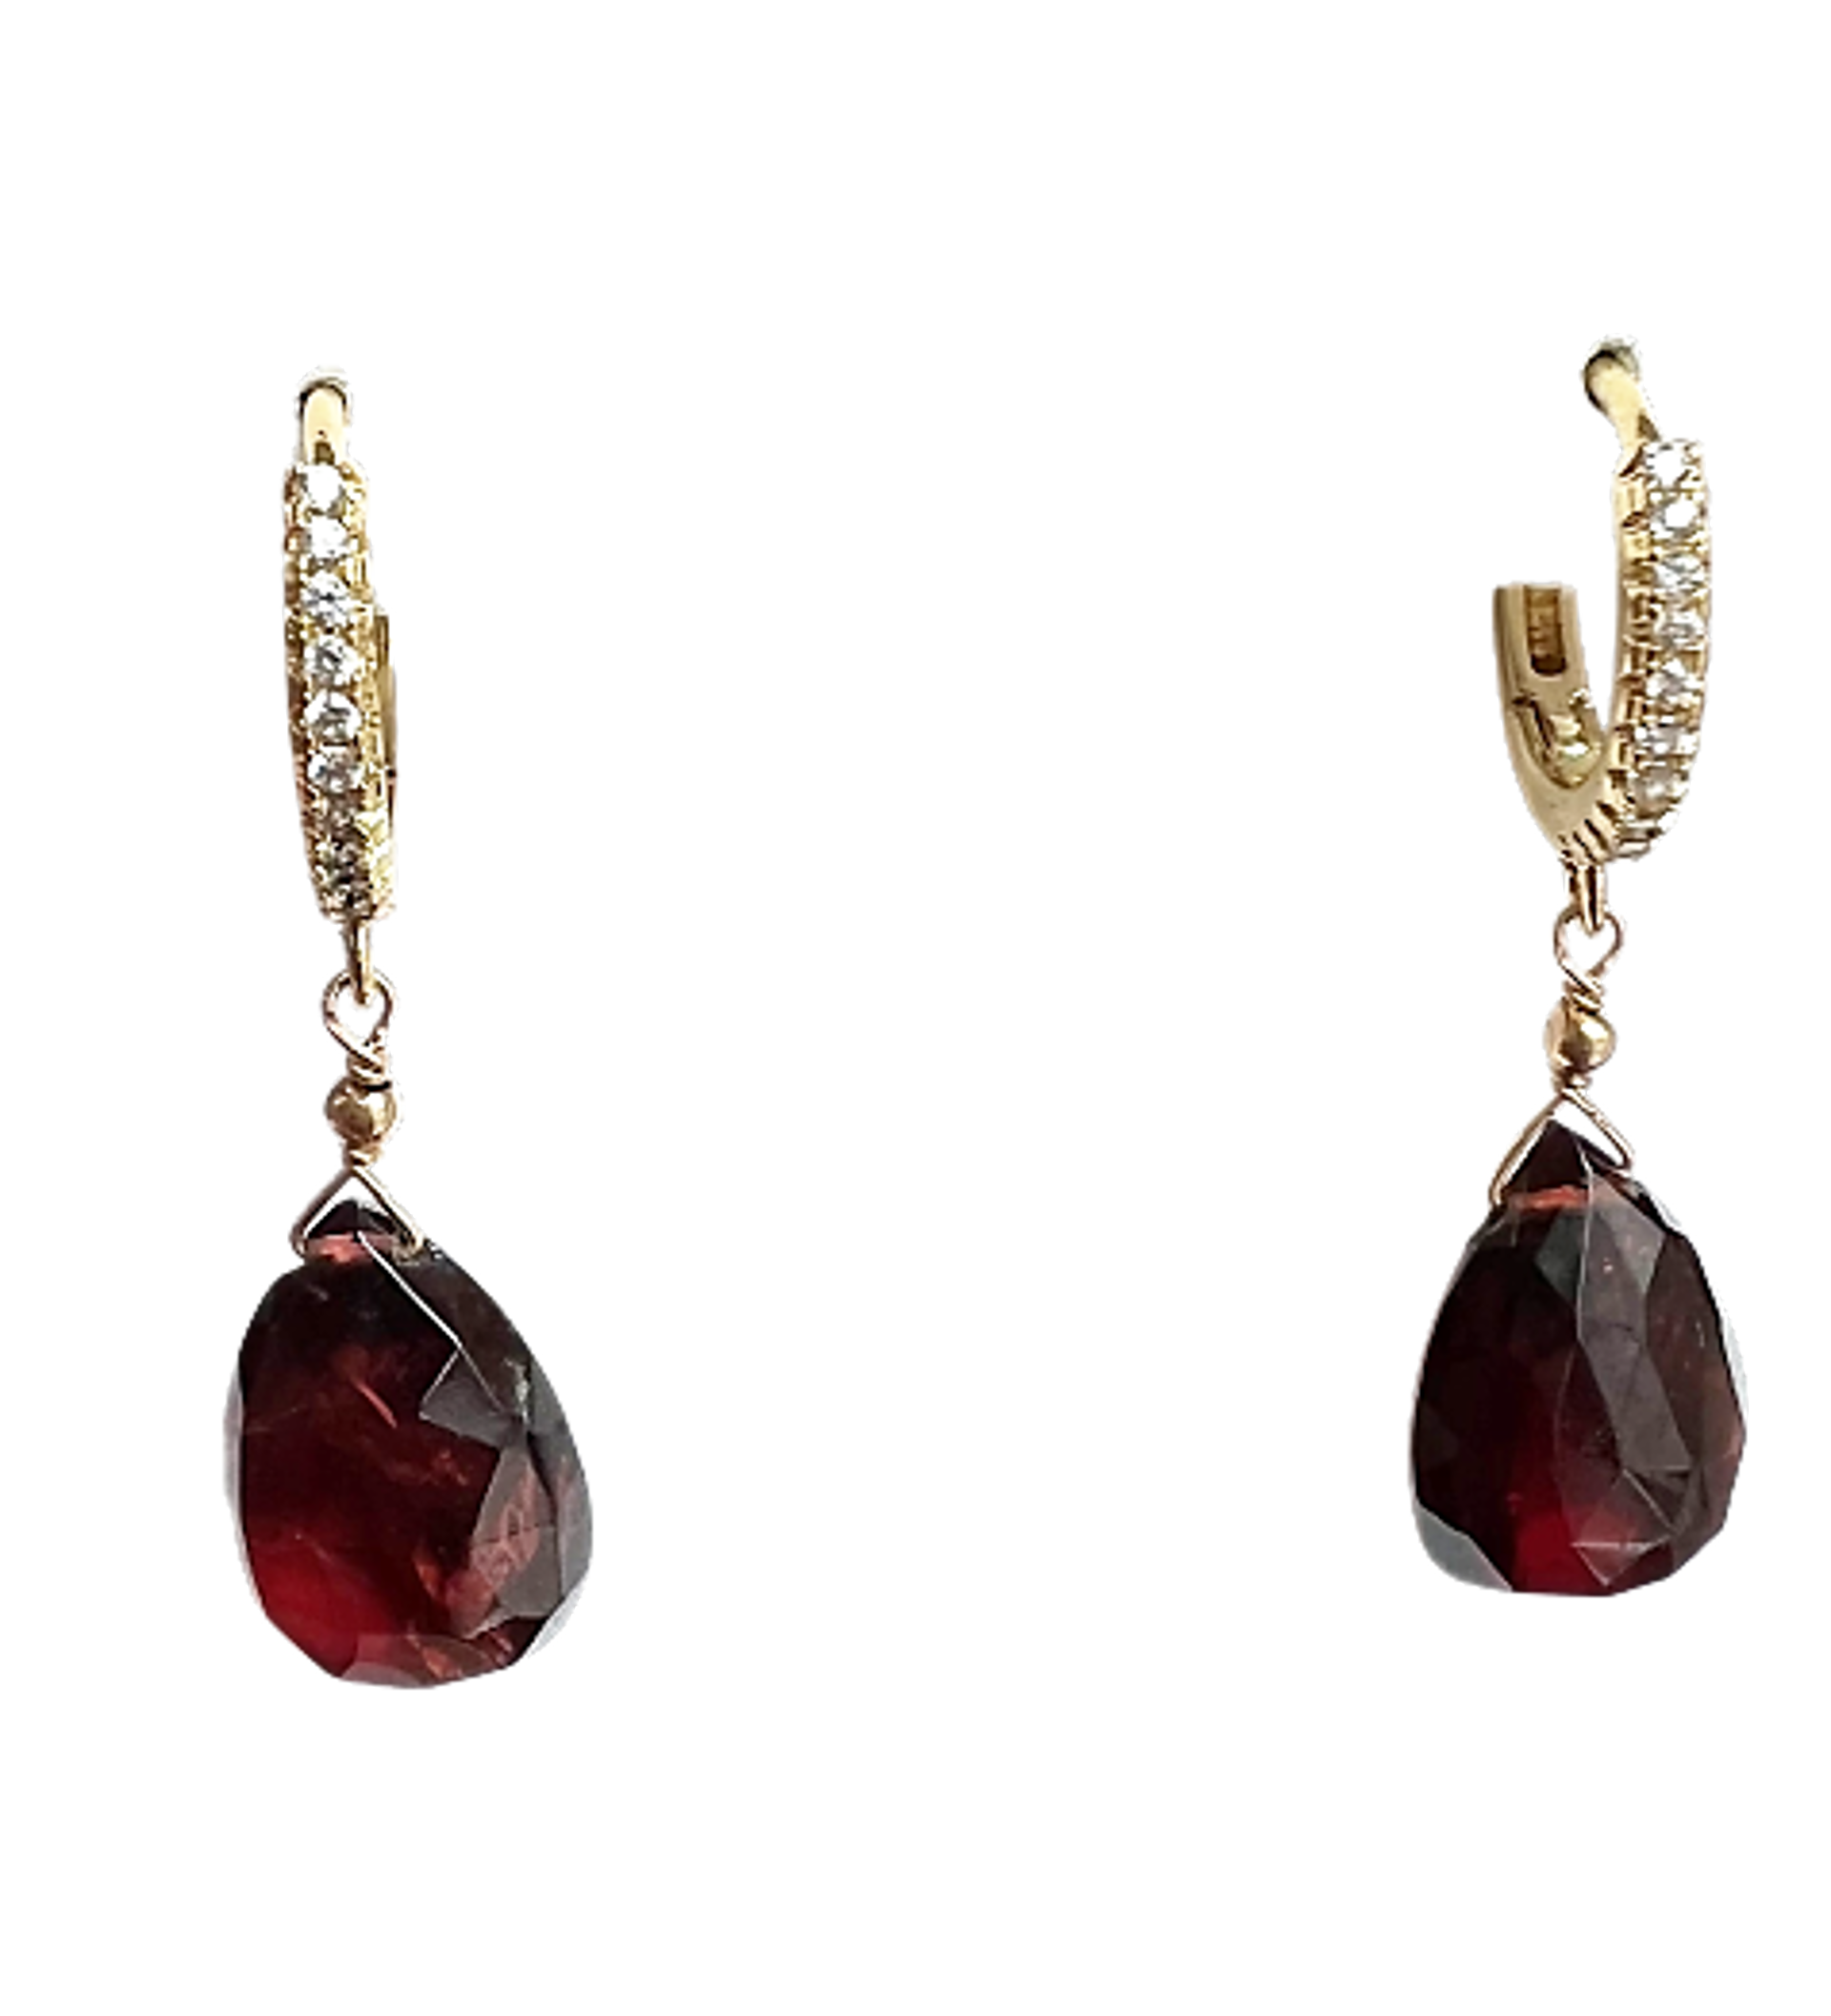 Garnet Briolette Earrings with Pave White Topaz Huggies - 14K Gold Filled by Melinda Lawton Jewelry